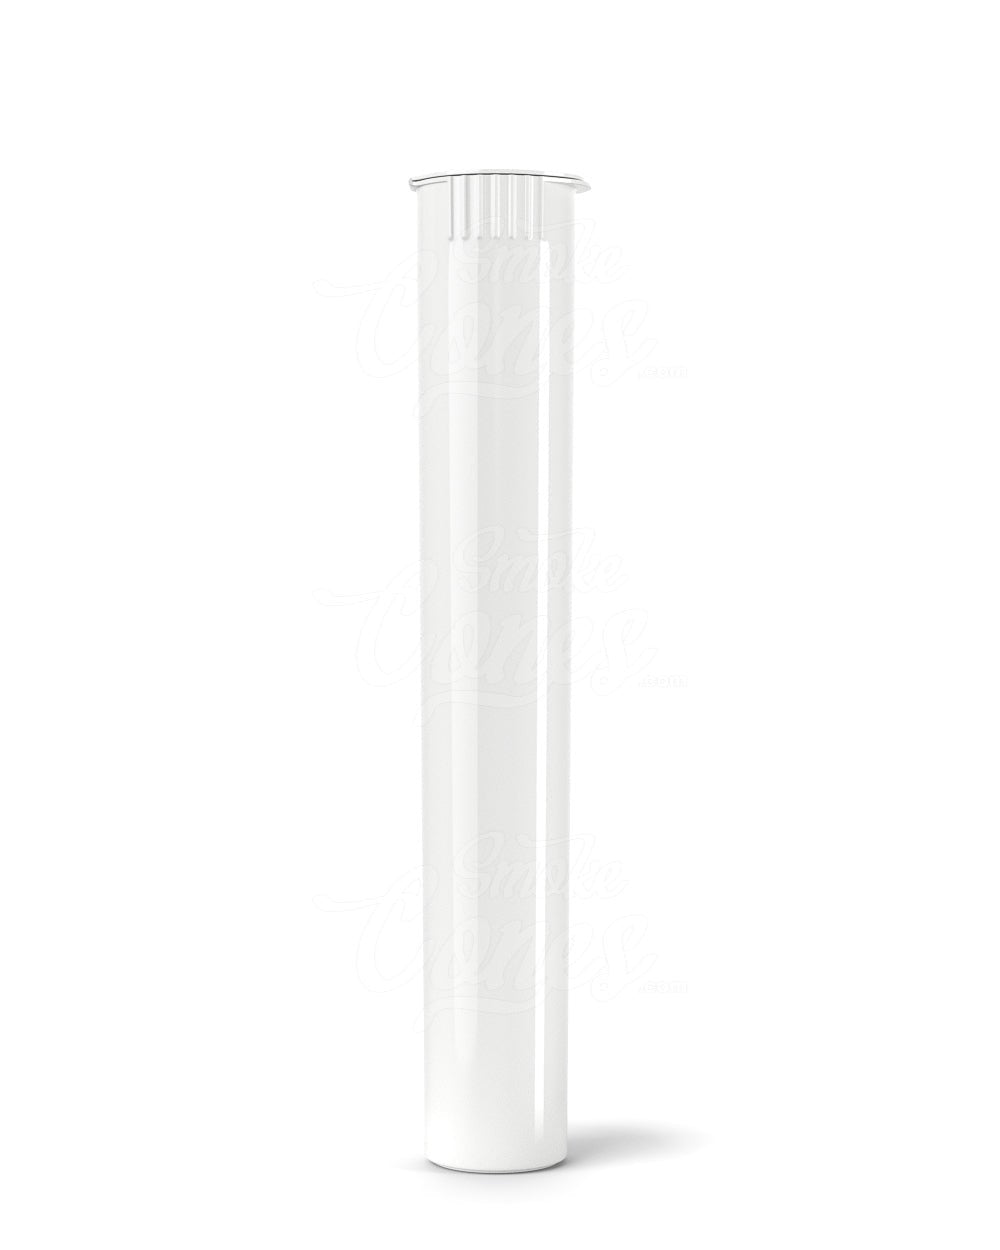 W Gallery 1000 Clear 116mm Pop Top Tubes - Airtight Smell Proof Containers  - Plastic Medical Grade Prescription Bottles for Pills Herbs Flowers